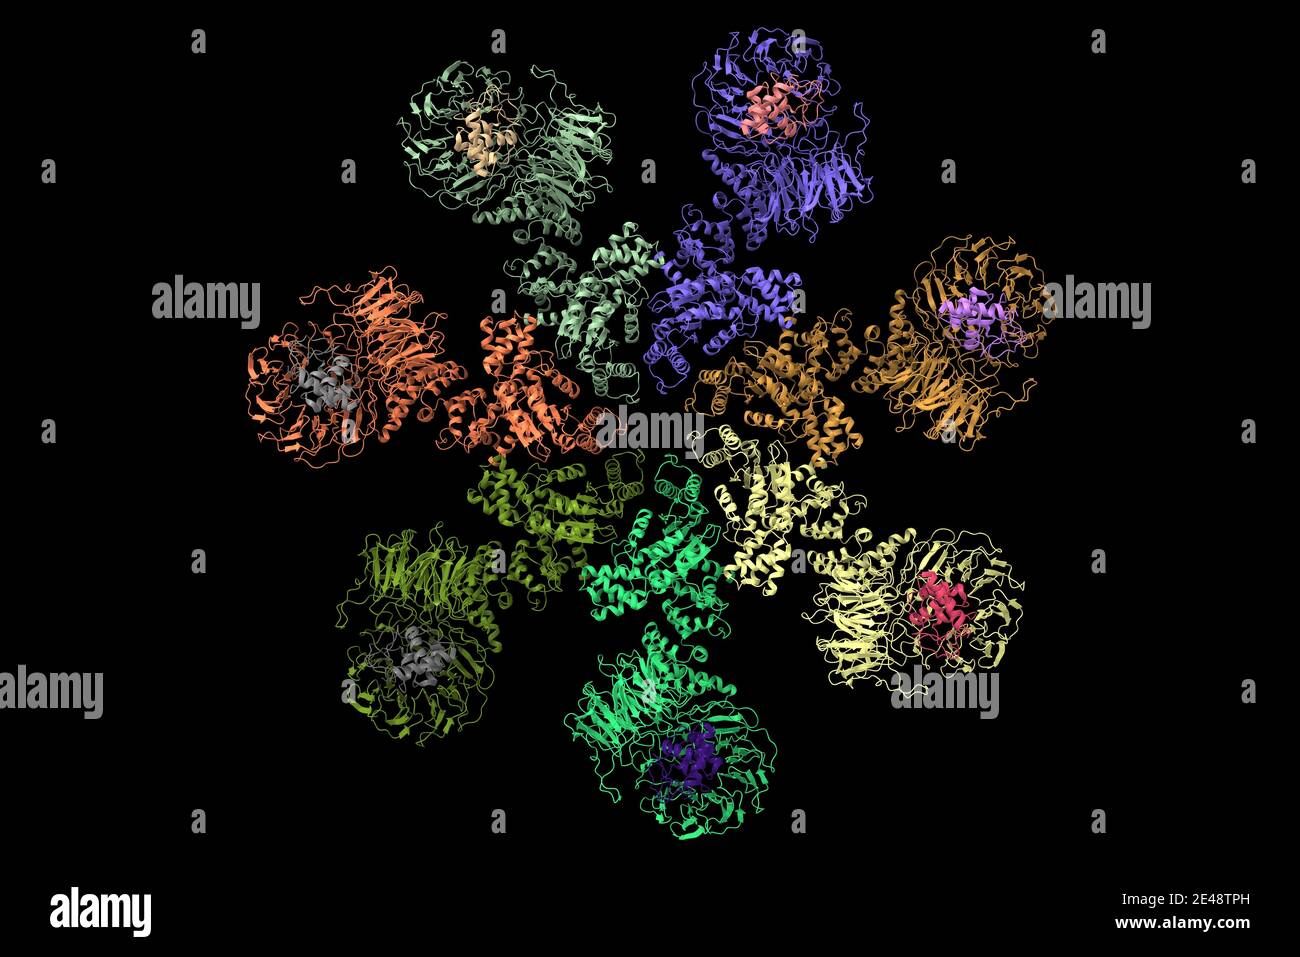 Structure of the Apaf-1 apoptosome with cytochrome C shown, 3D cartoon model, black background Stock Photo